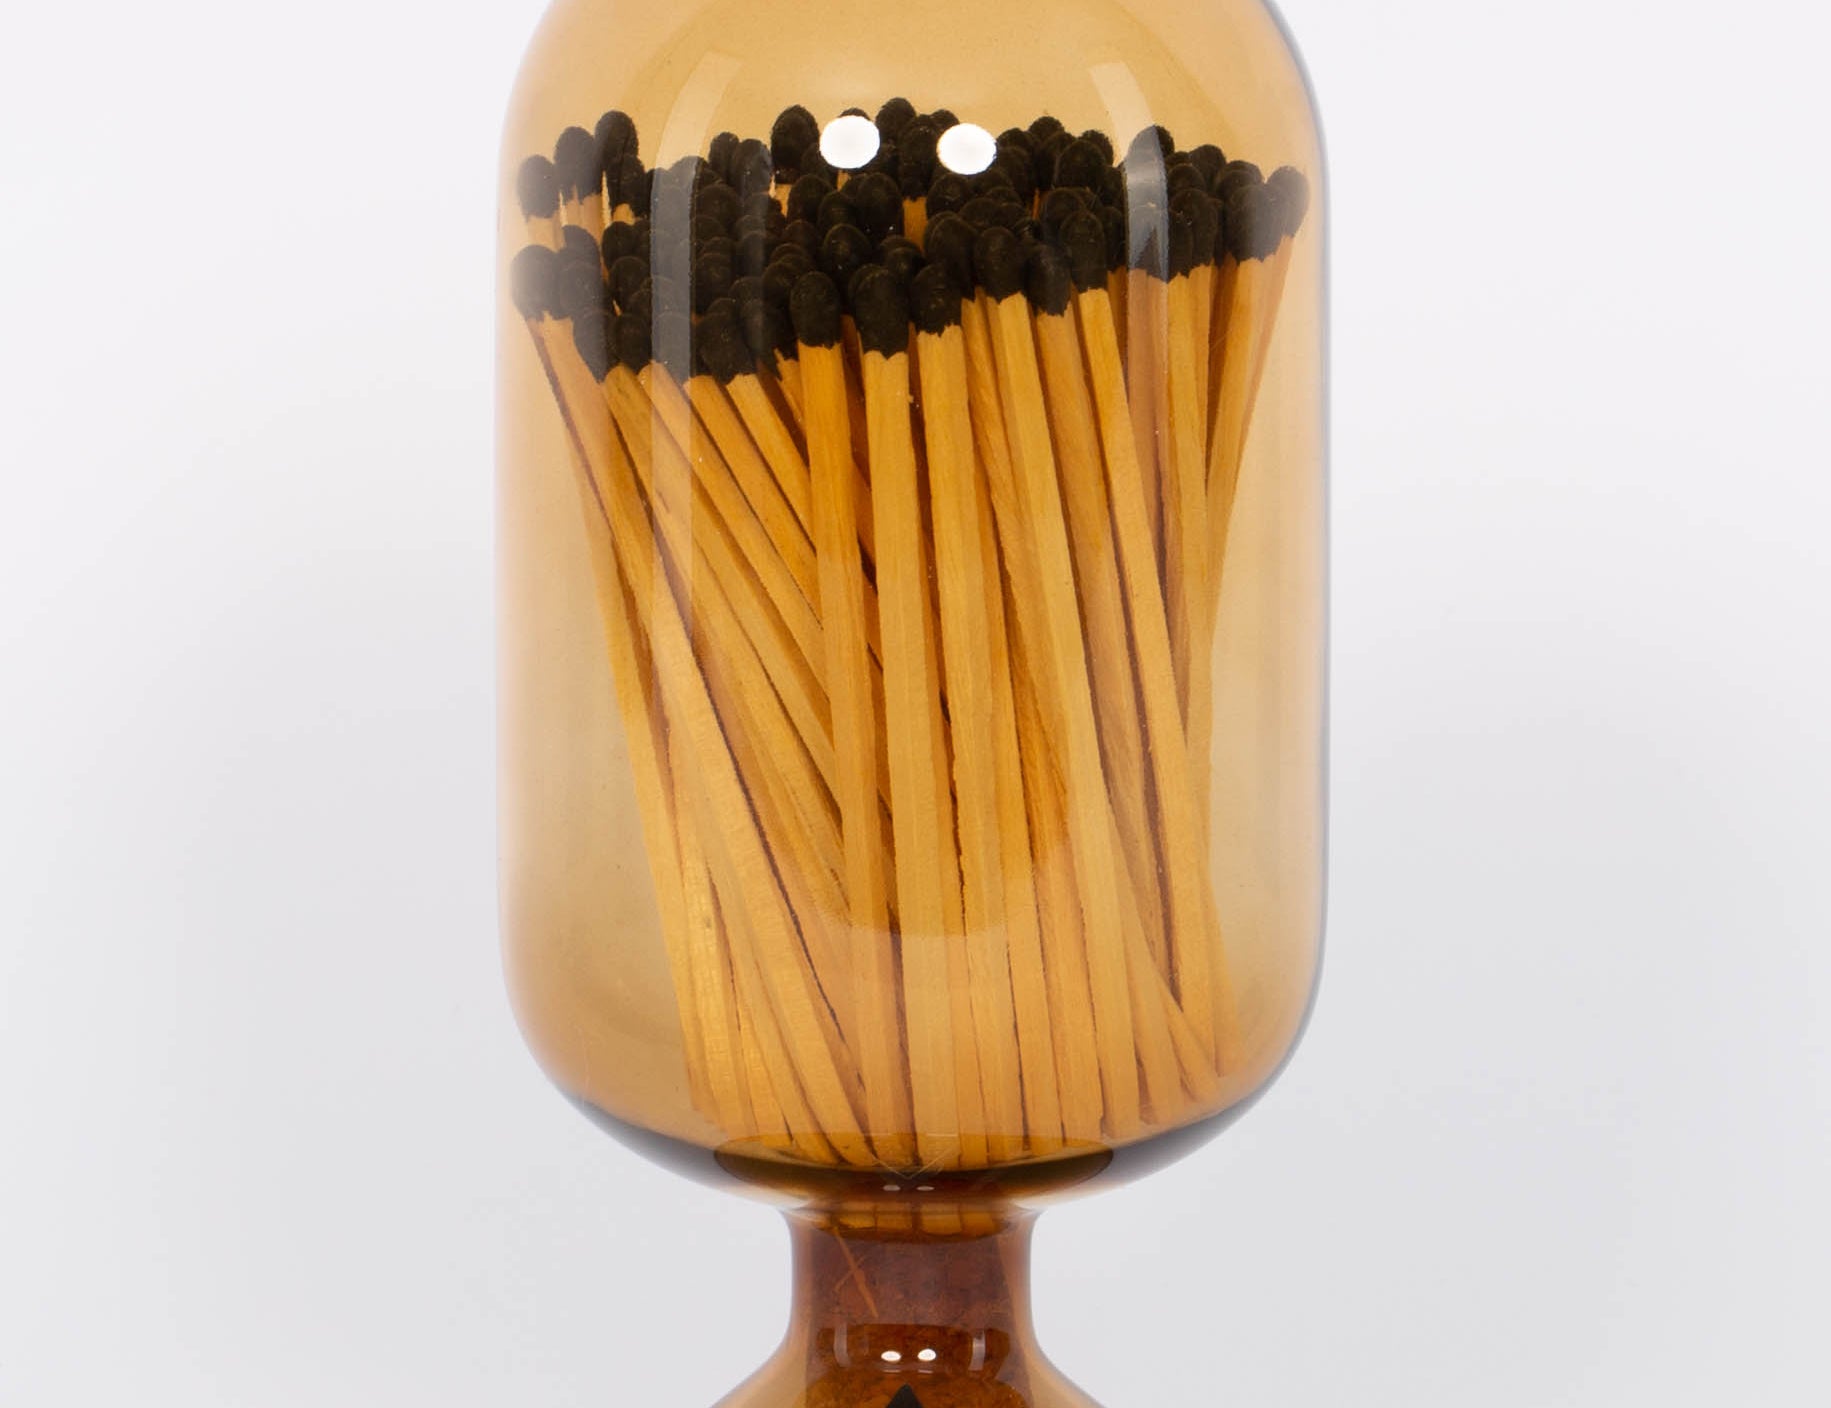 Amber Match Cloche by Skeem in jewel-toned vintage glass domes fitted with cork, holding 120 matches. White background.